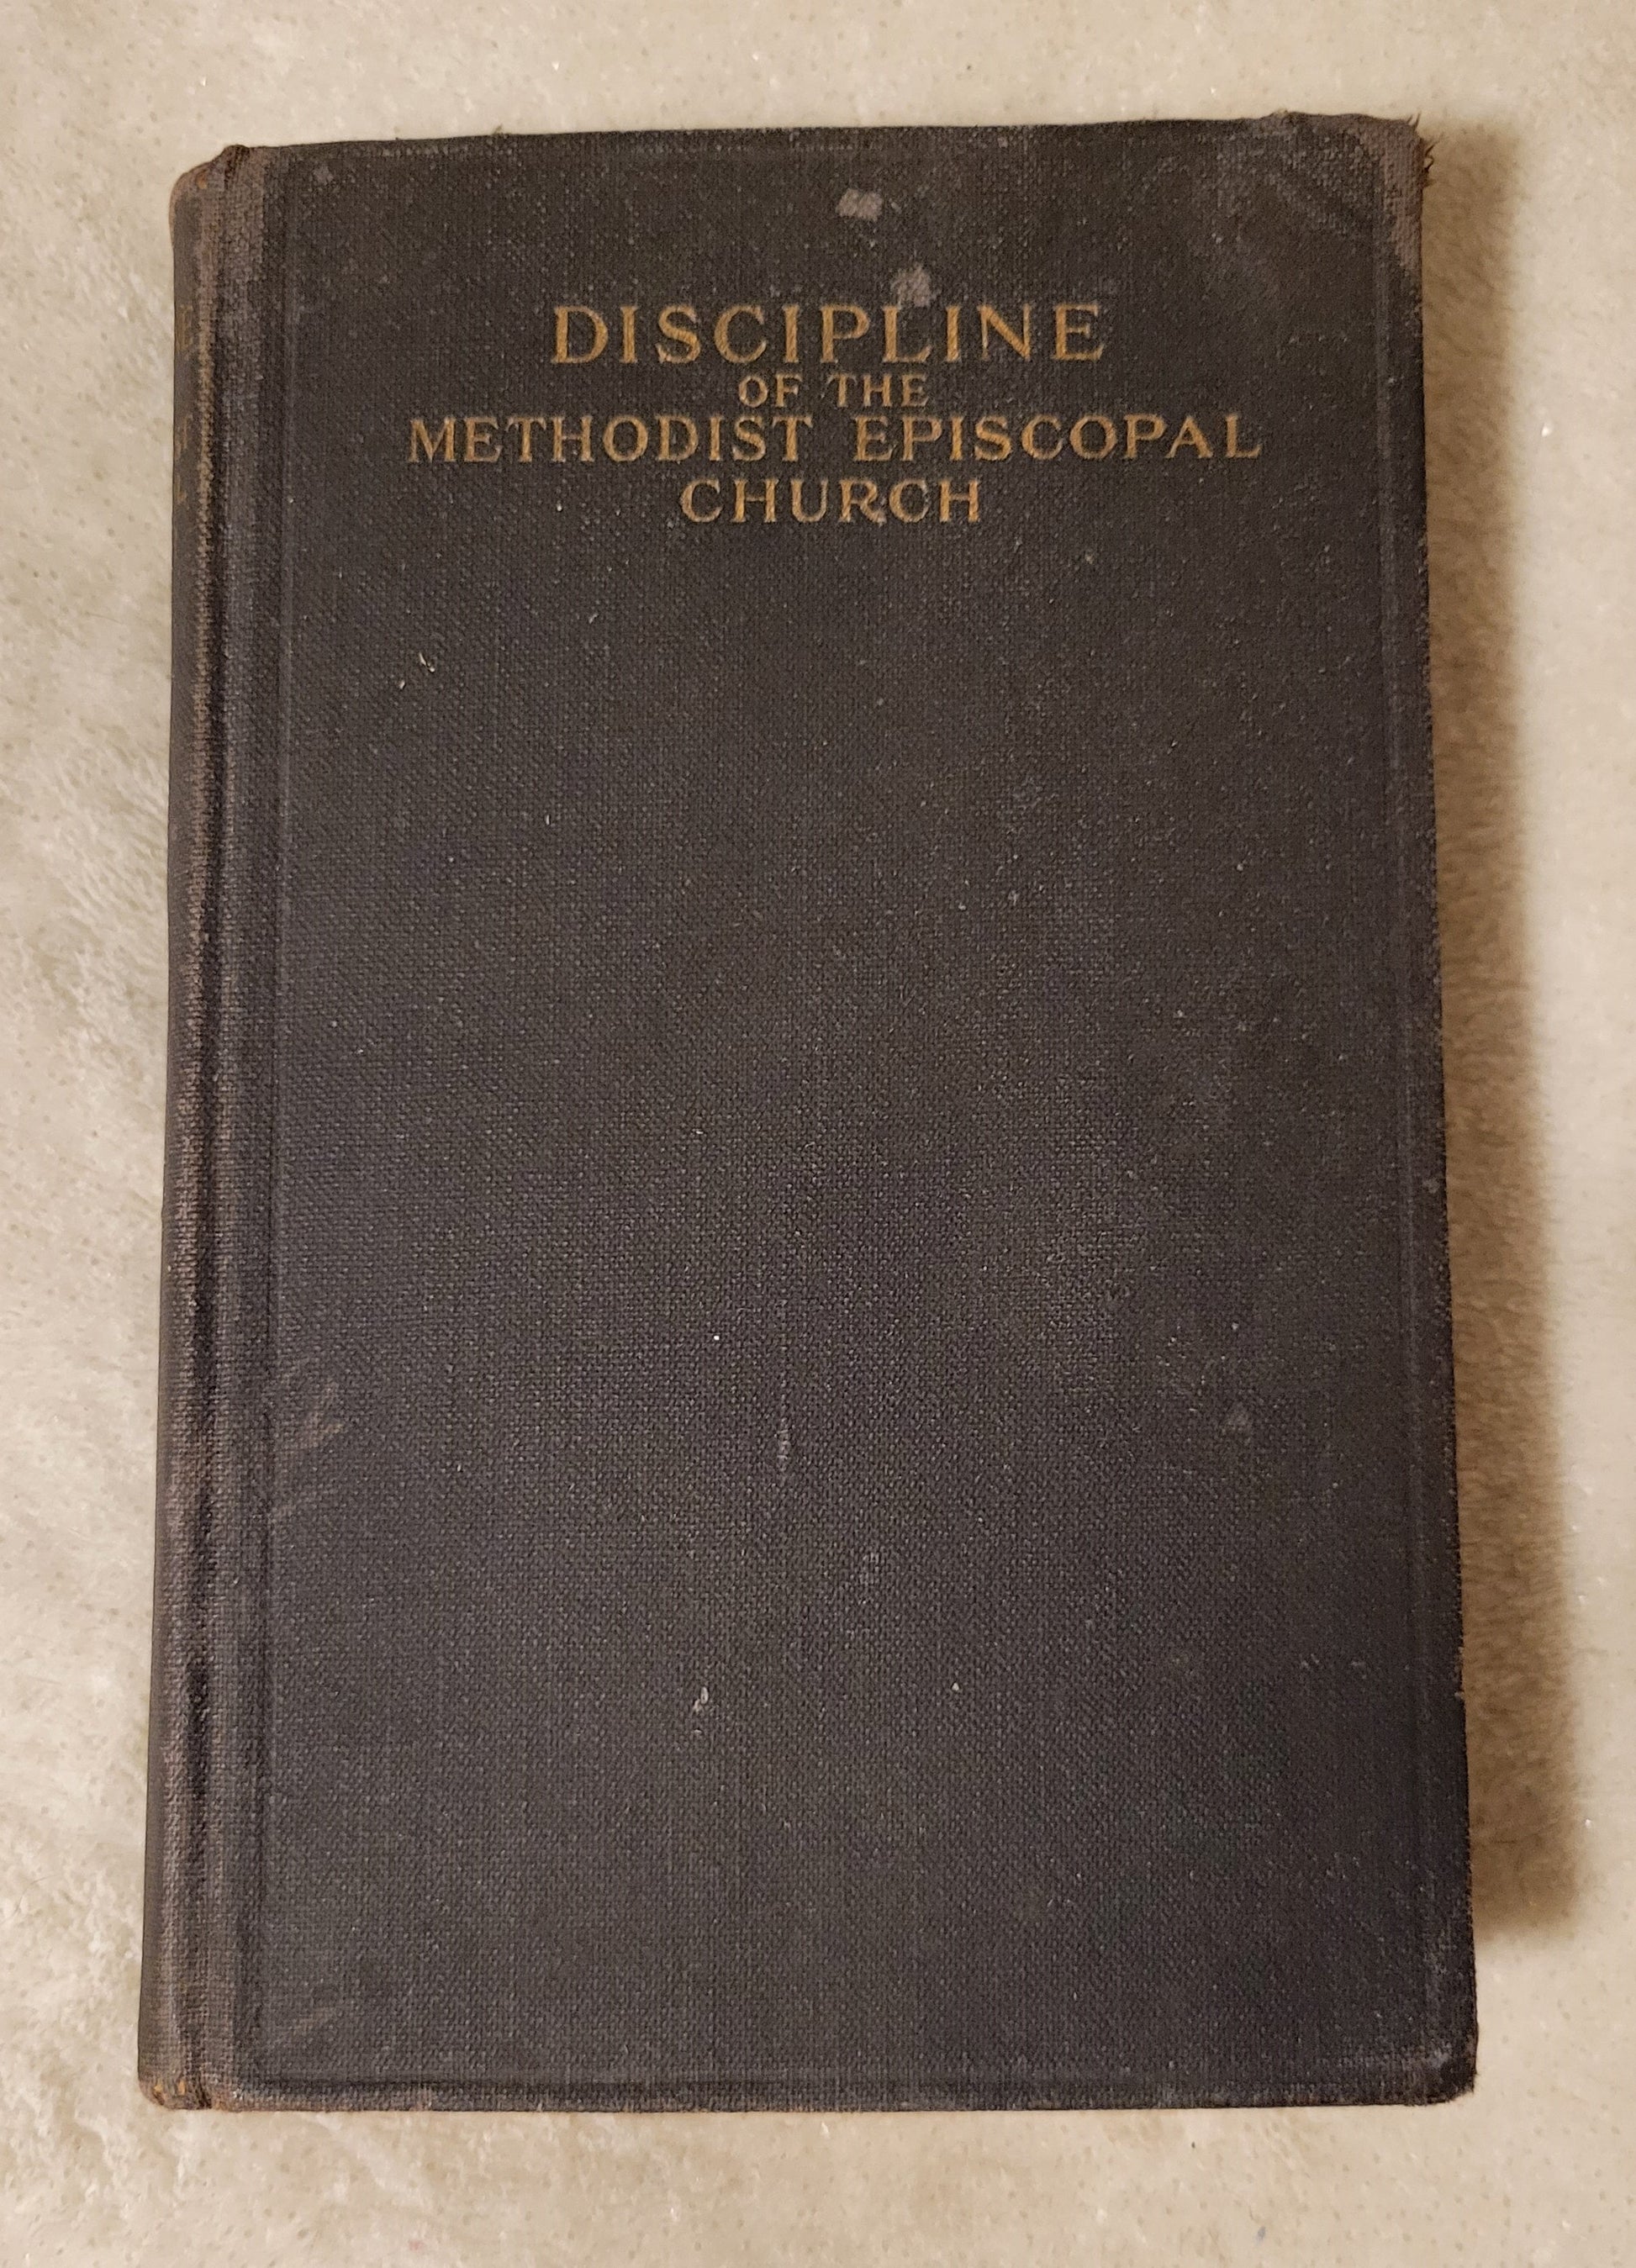 Antique book "Doctrines and Discipline of the Methodist Episcopal Church" published by the Methodist Book Concern, 1912. View of front cover.